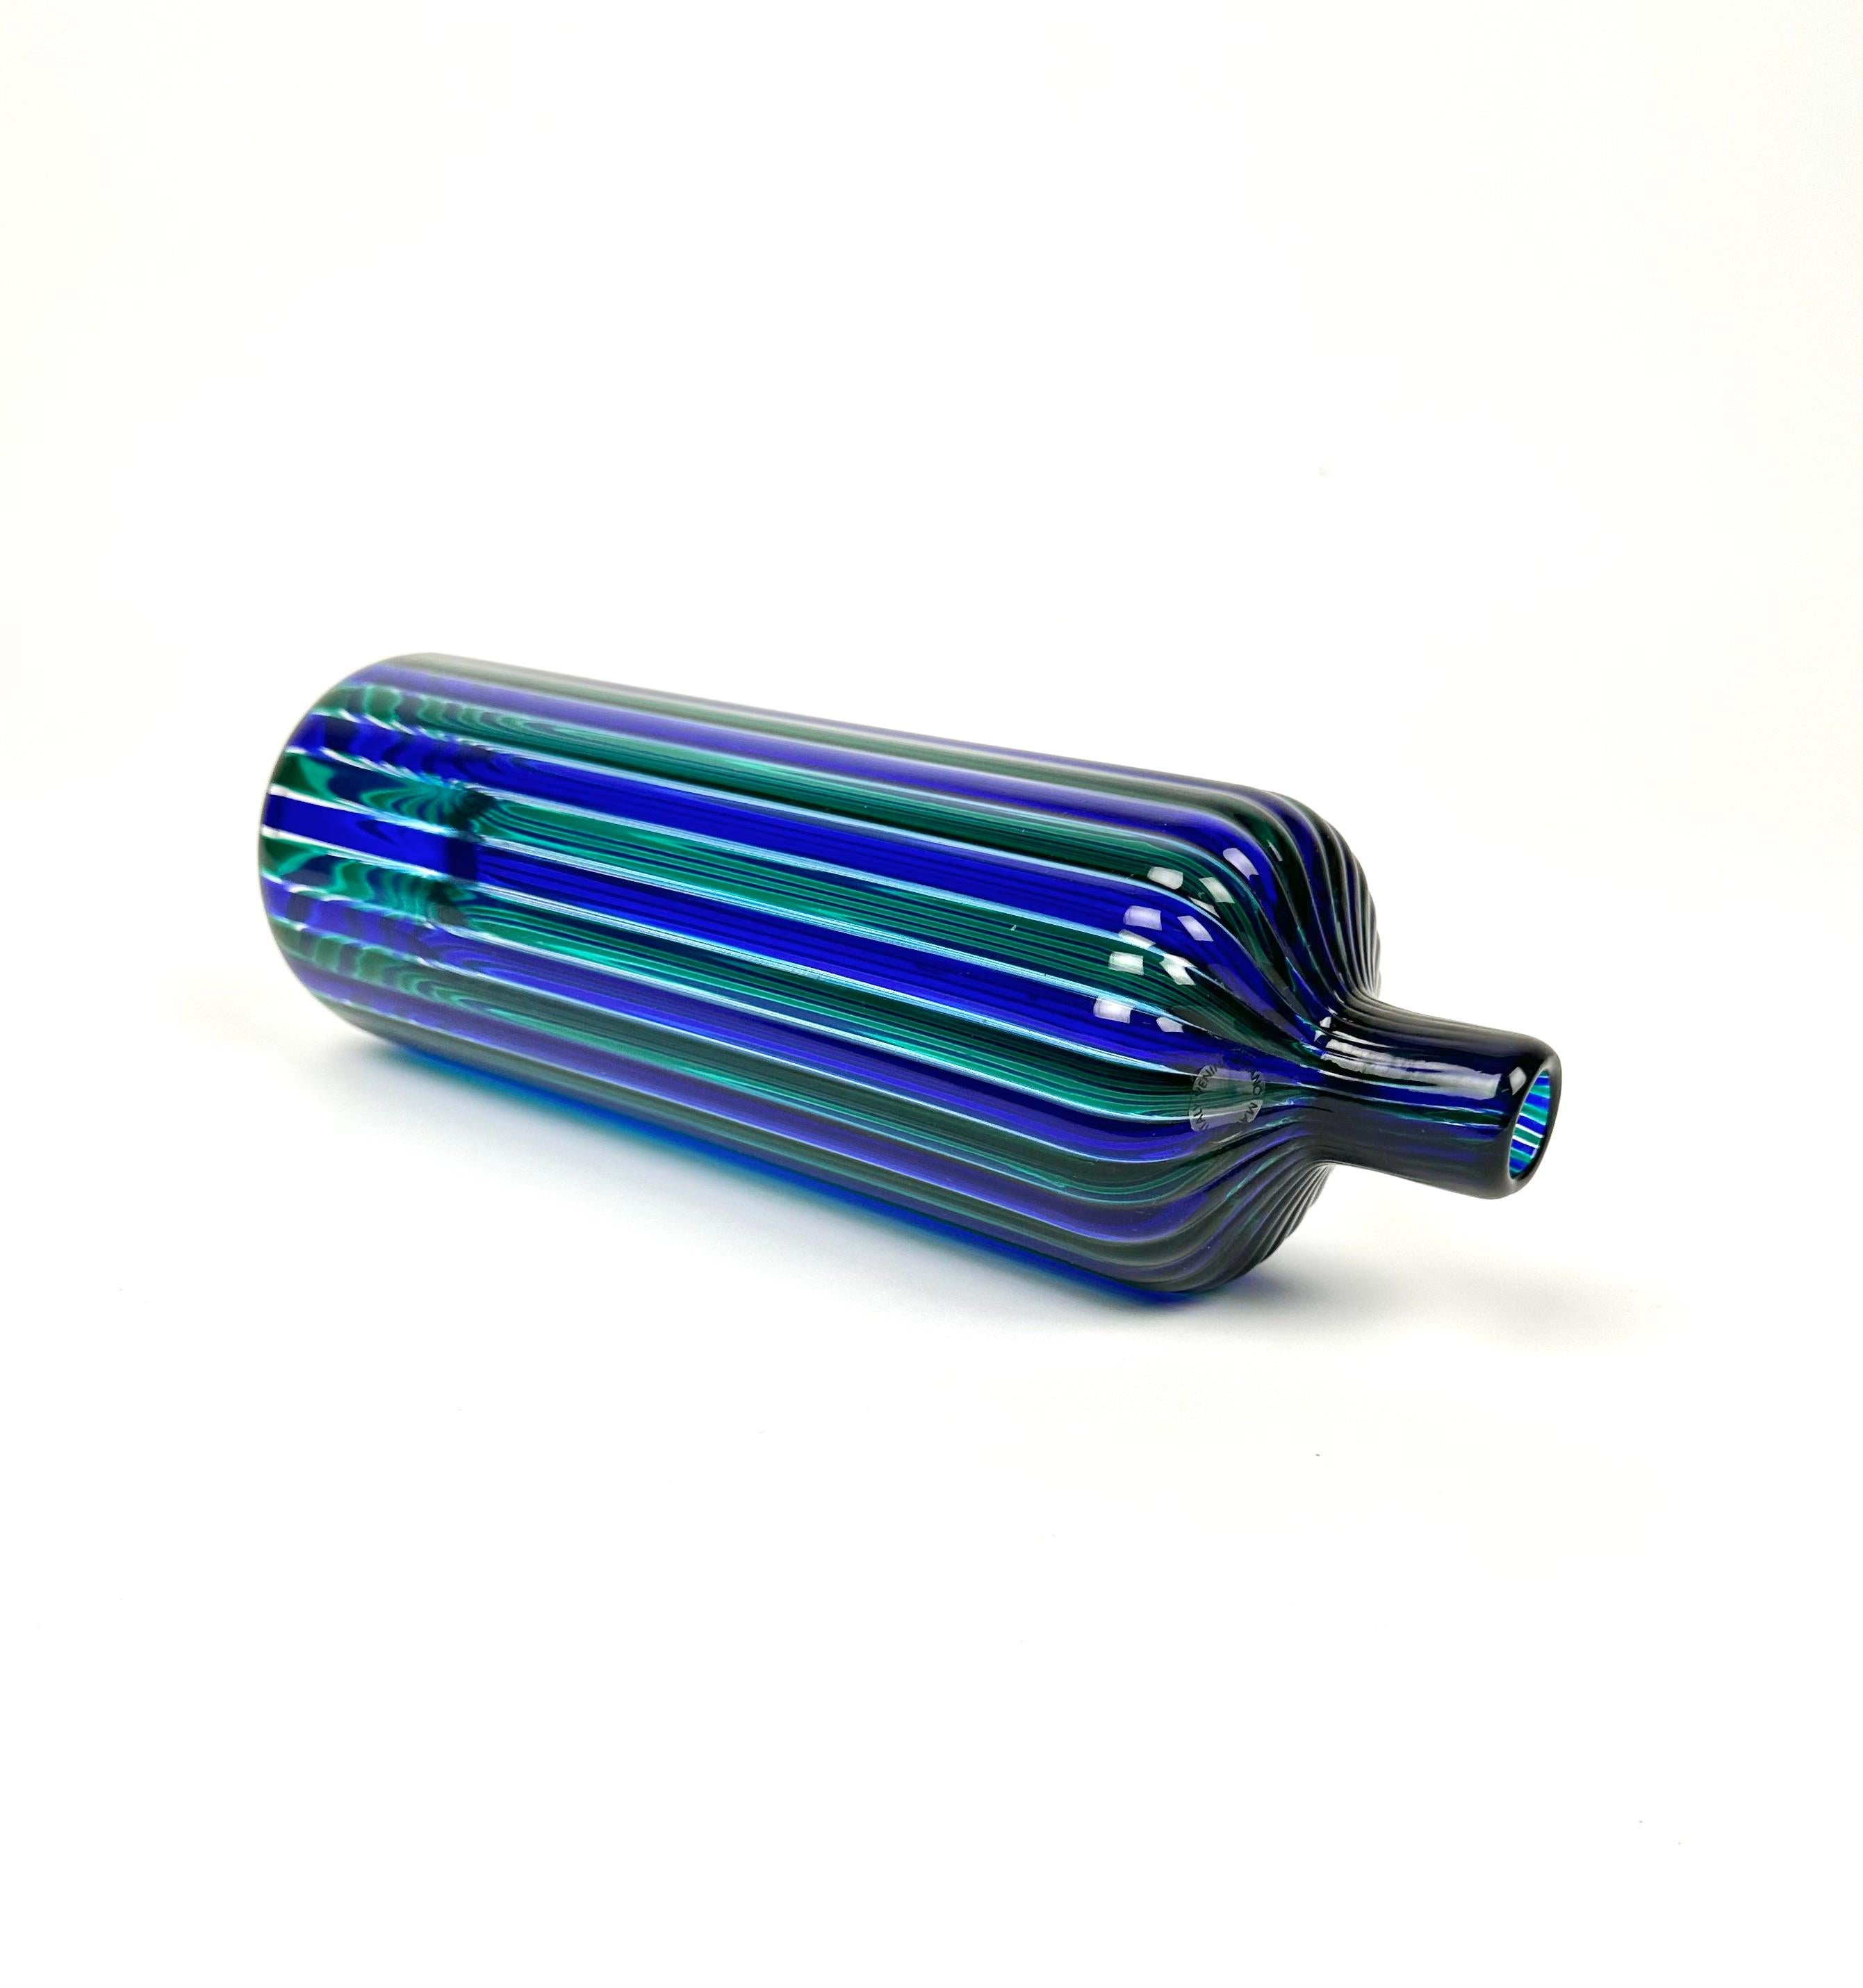 Blue and Green Murano Glass Bottle by Fulvio Bianconi for Venini, Italy 1988 In Good Condition For Sale In Rome, IT